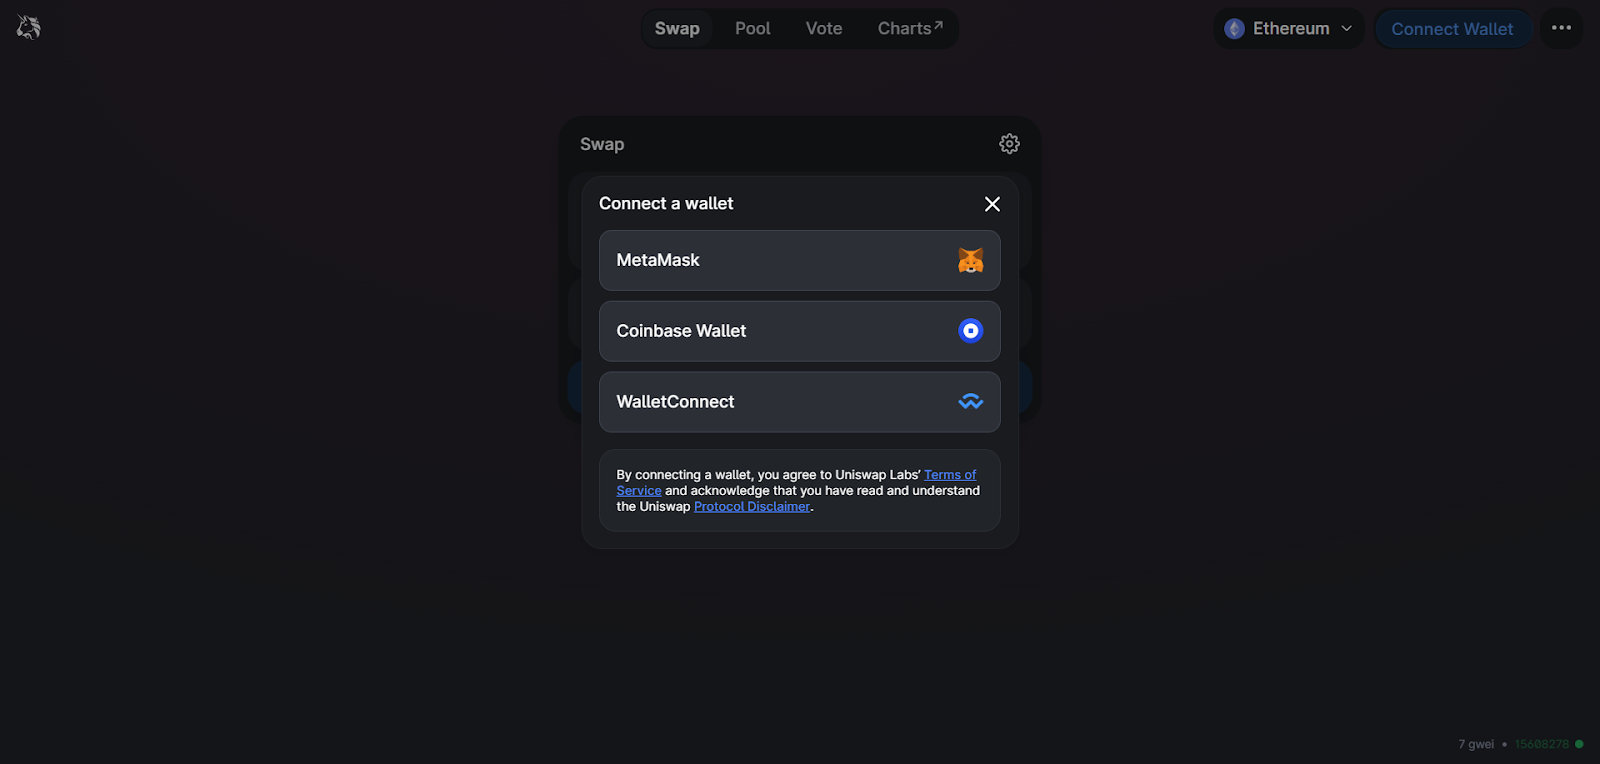 A screenshot showing how you should connect your wallet to Uniswap.